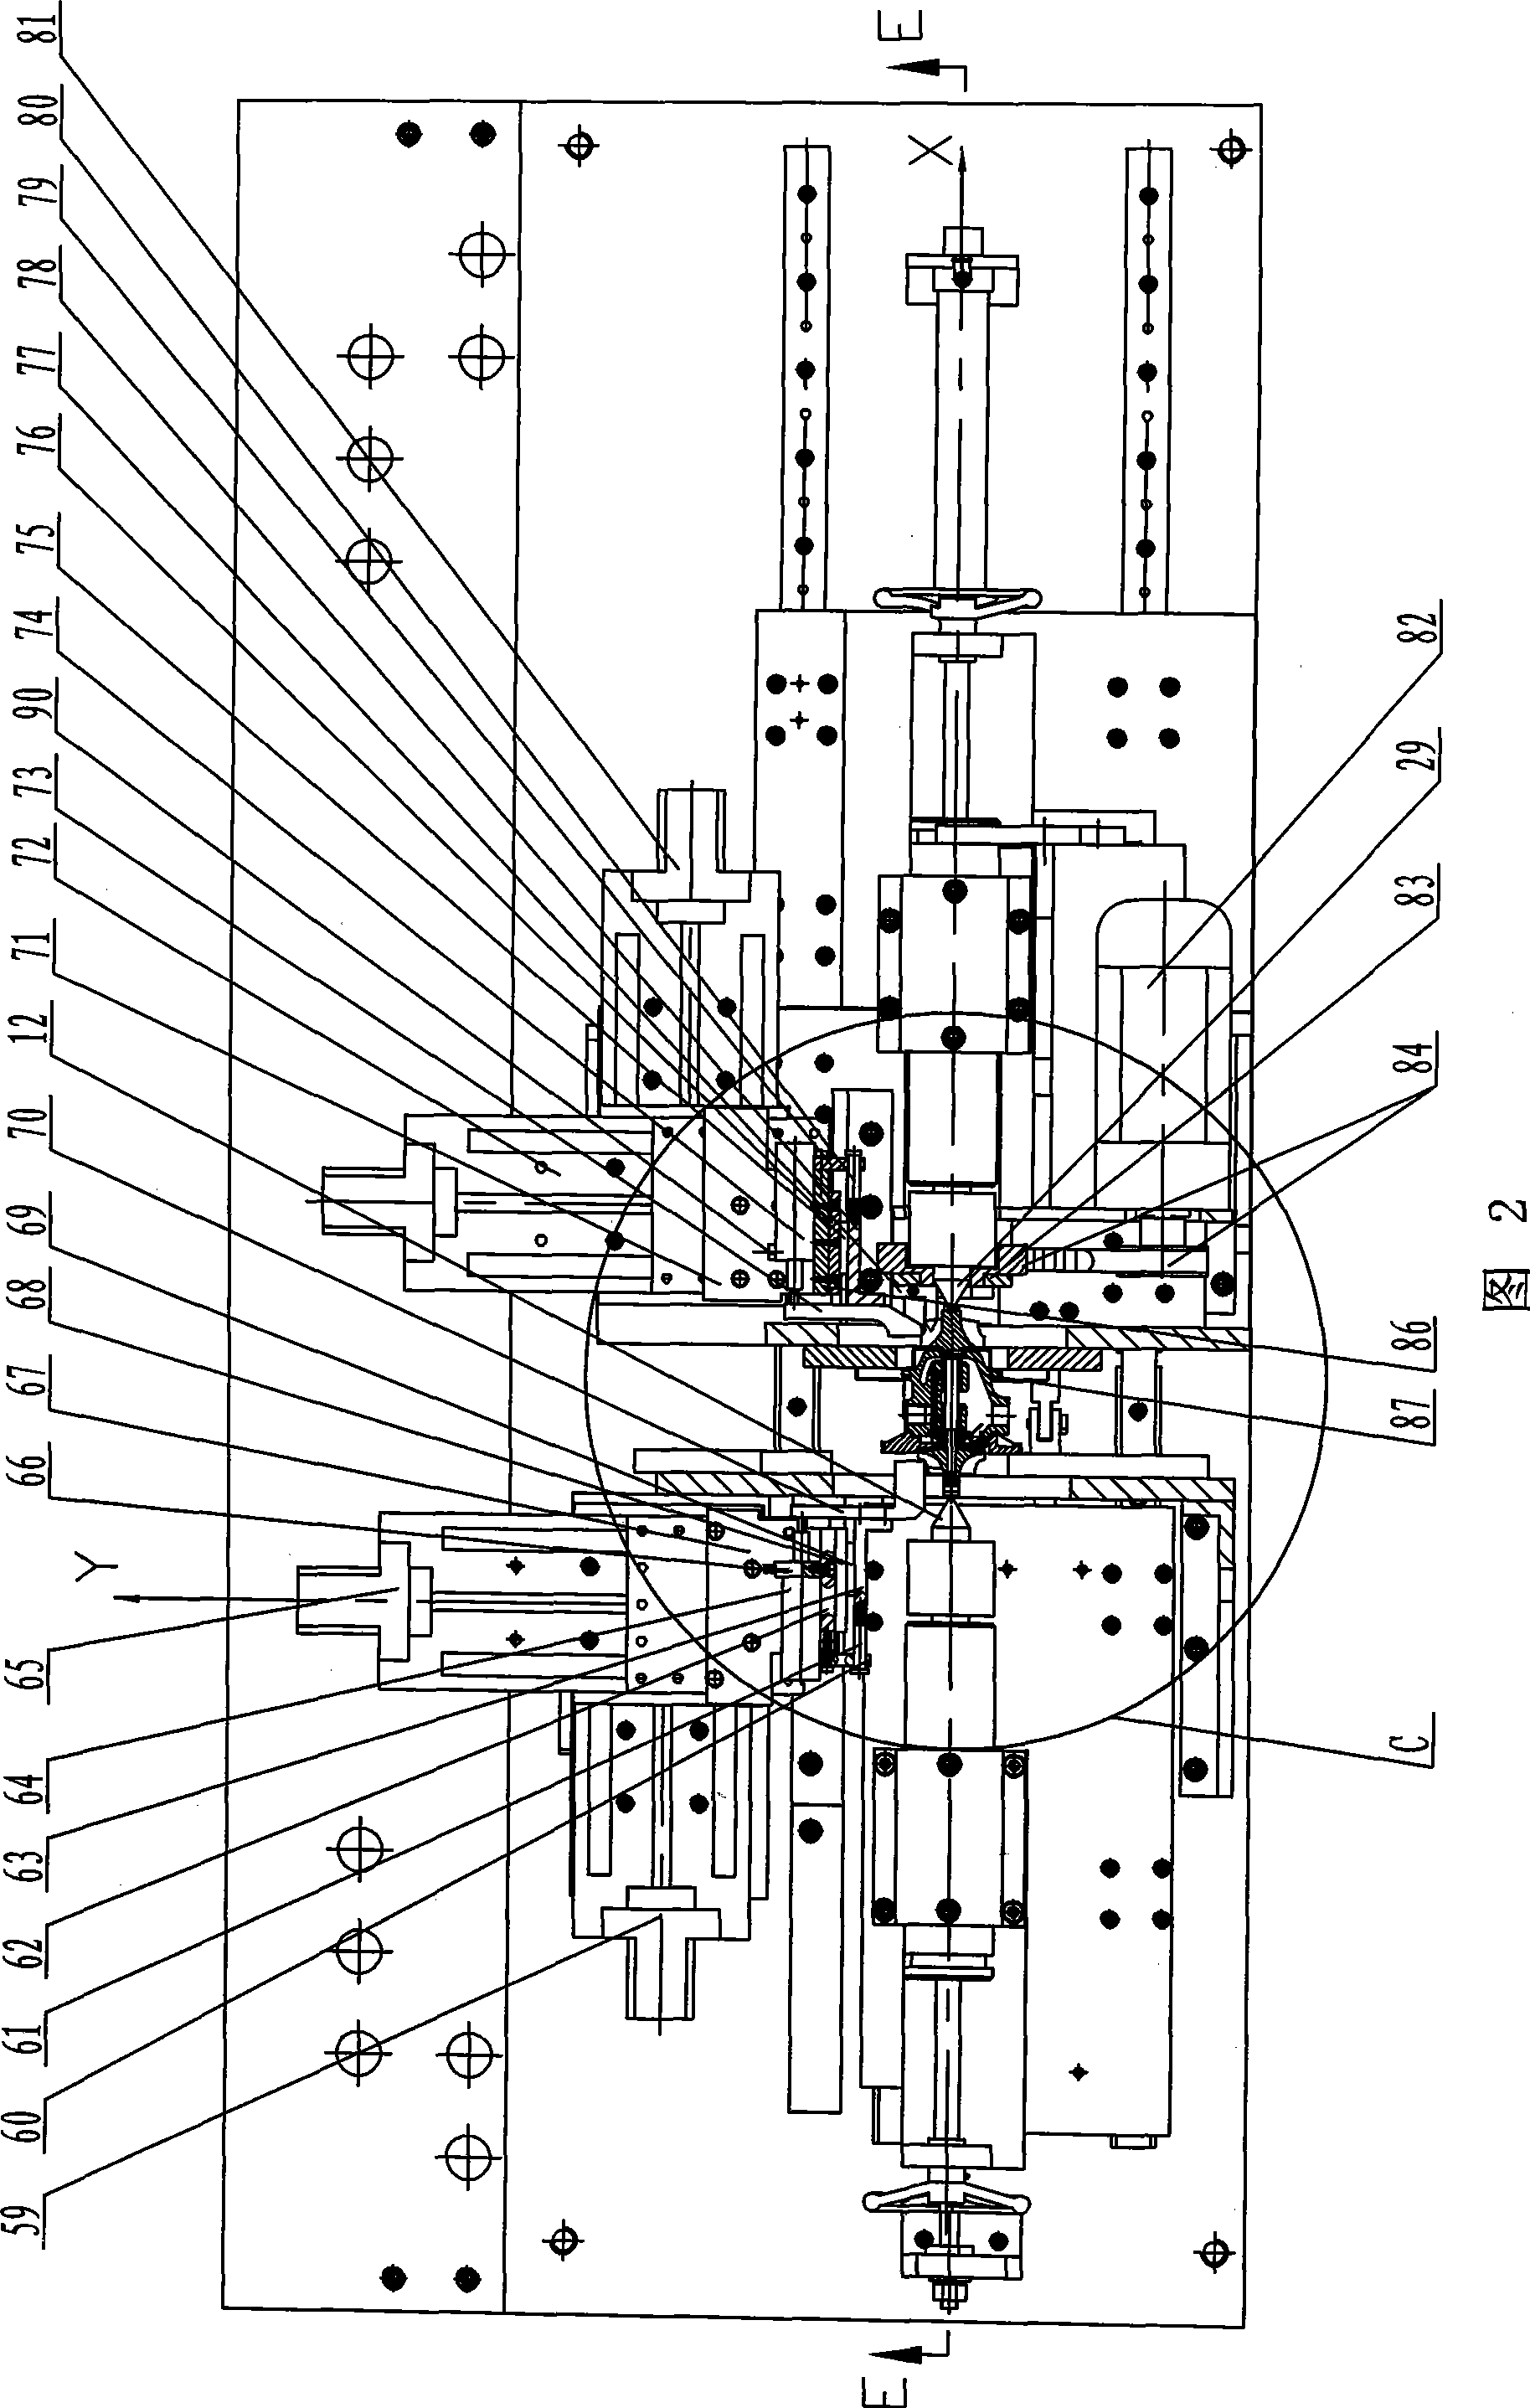 Core rotor assembly dimension measuring device for turbo-charger